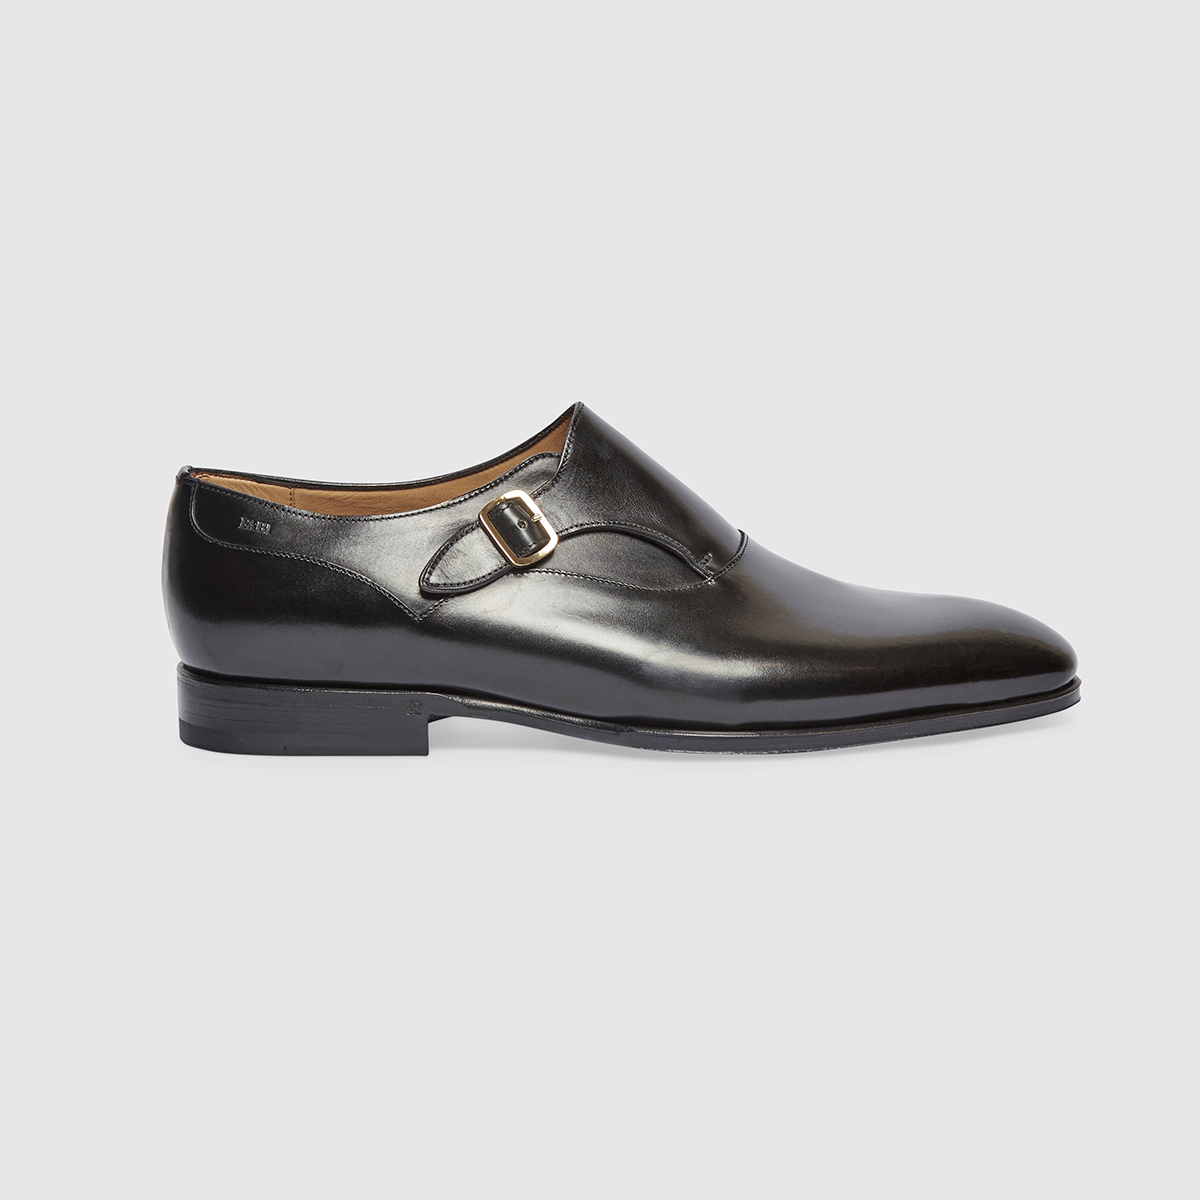 Monk Shoes Shoes in Calfskin Black Leather Gruppo Fabi on sale 2022